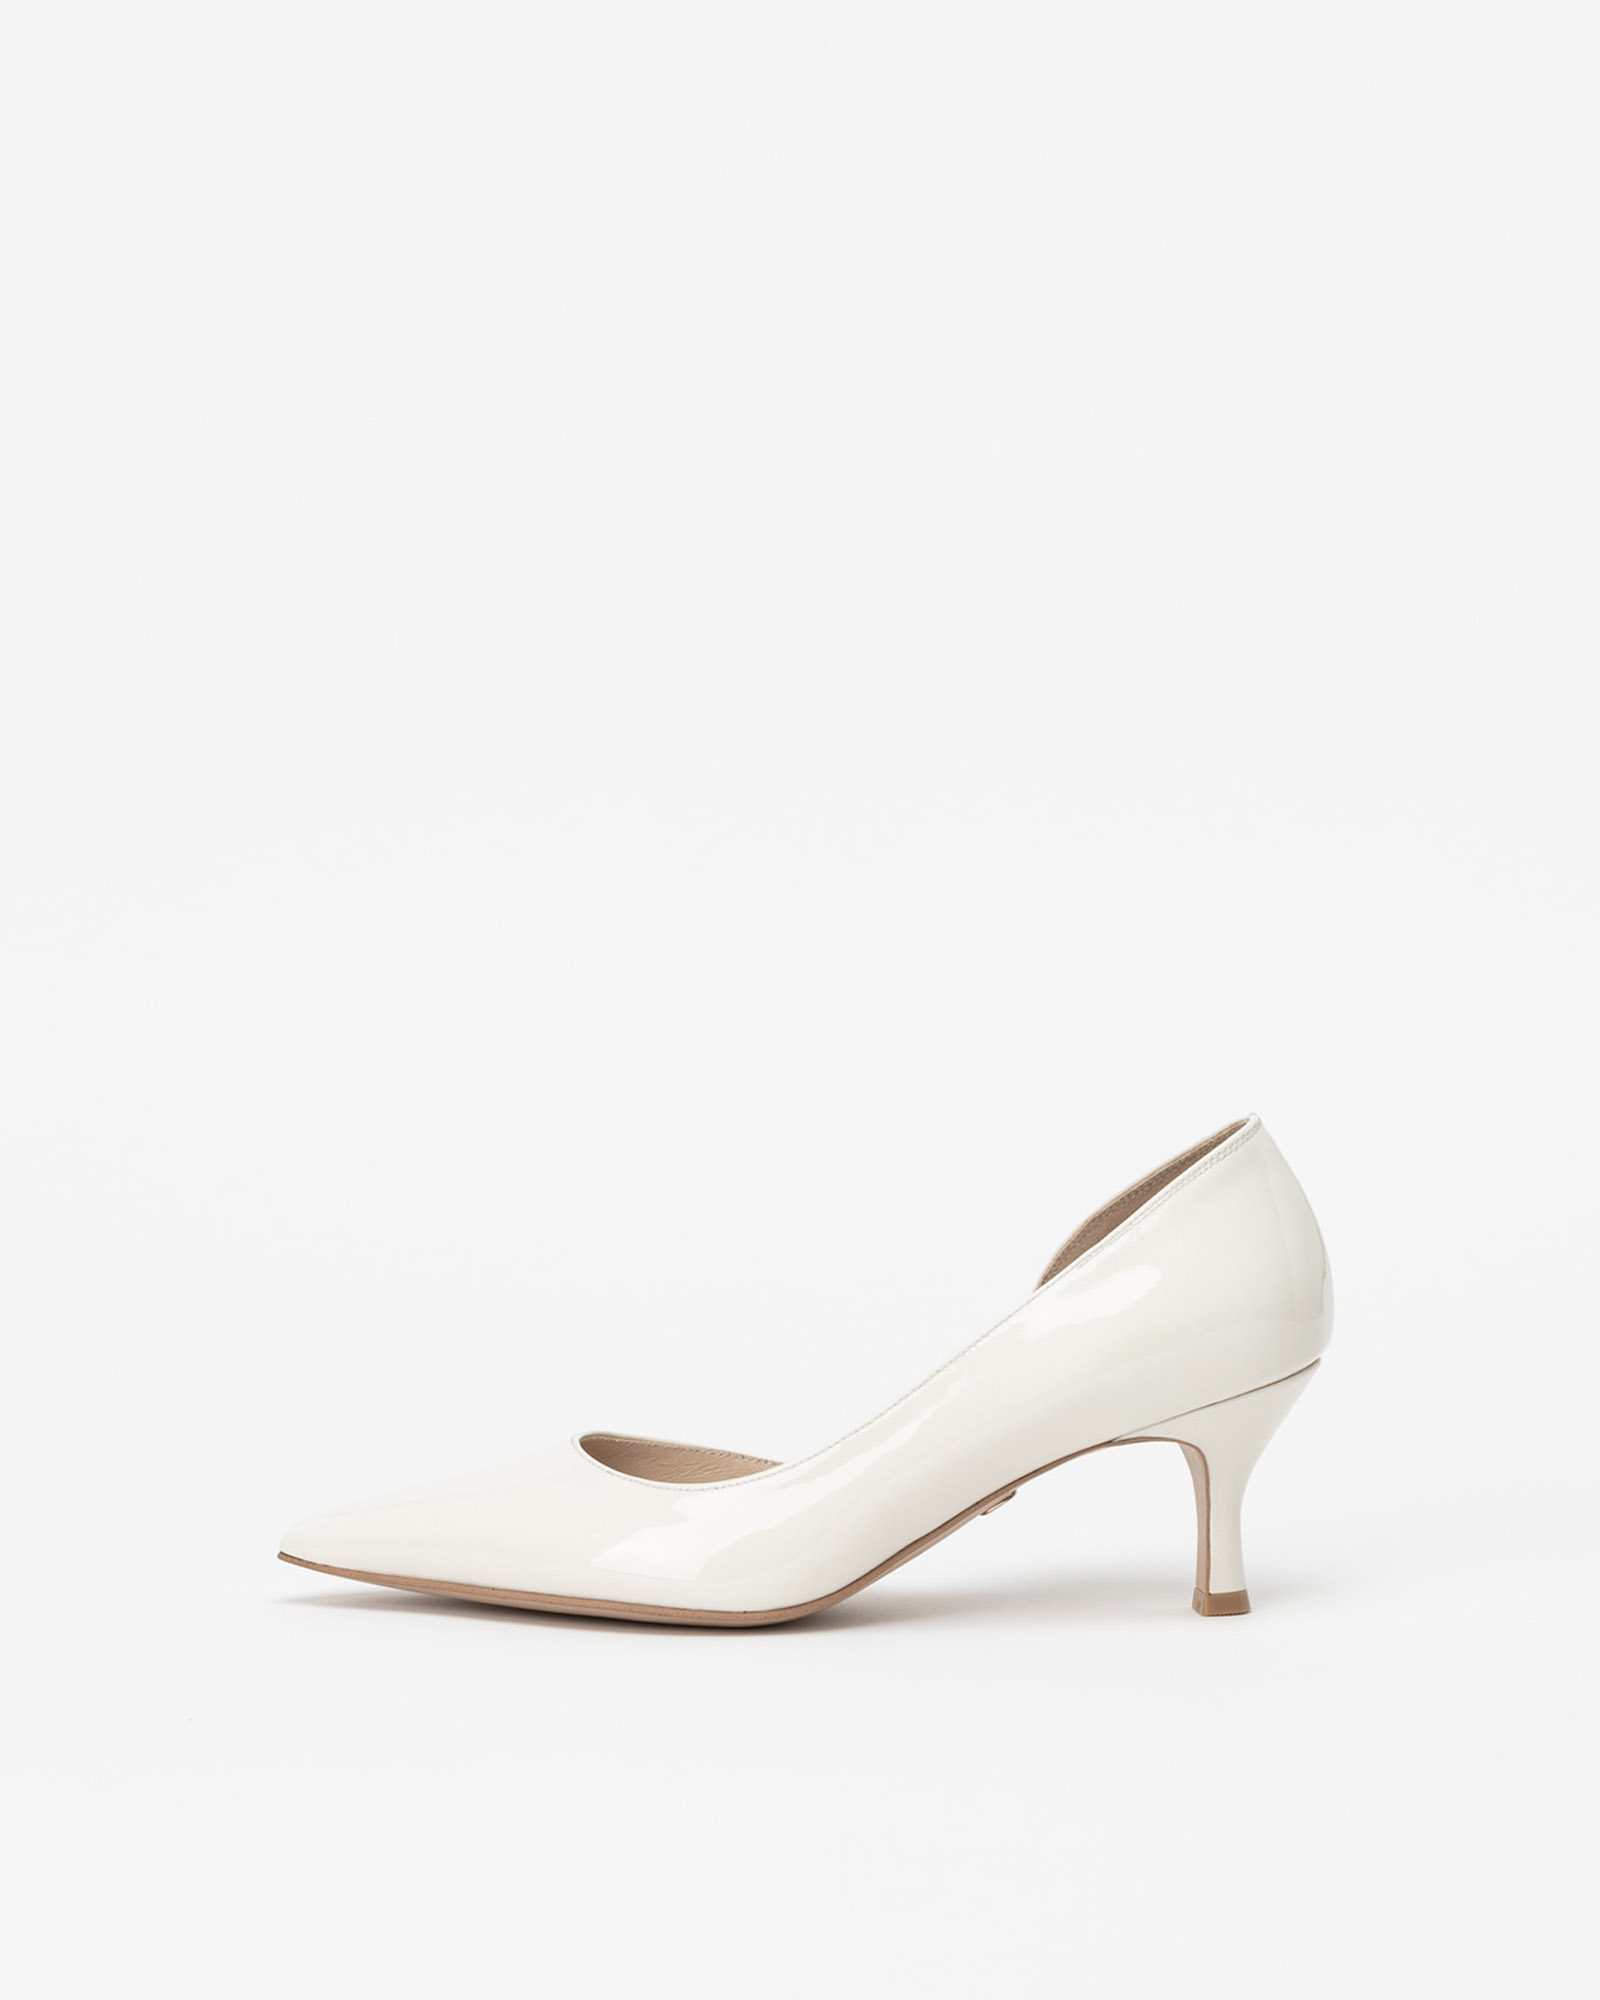 Francis Sidecut Pumps in Milky White Patent